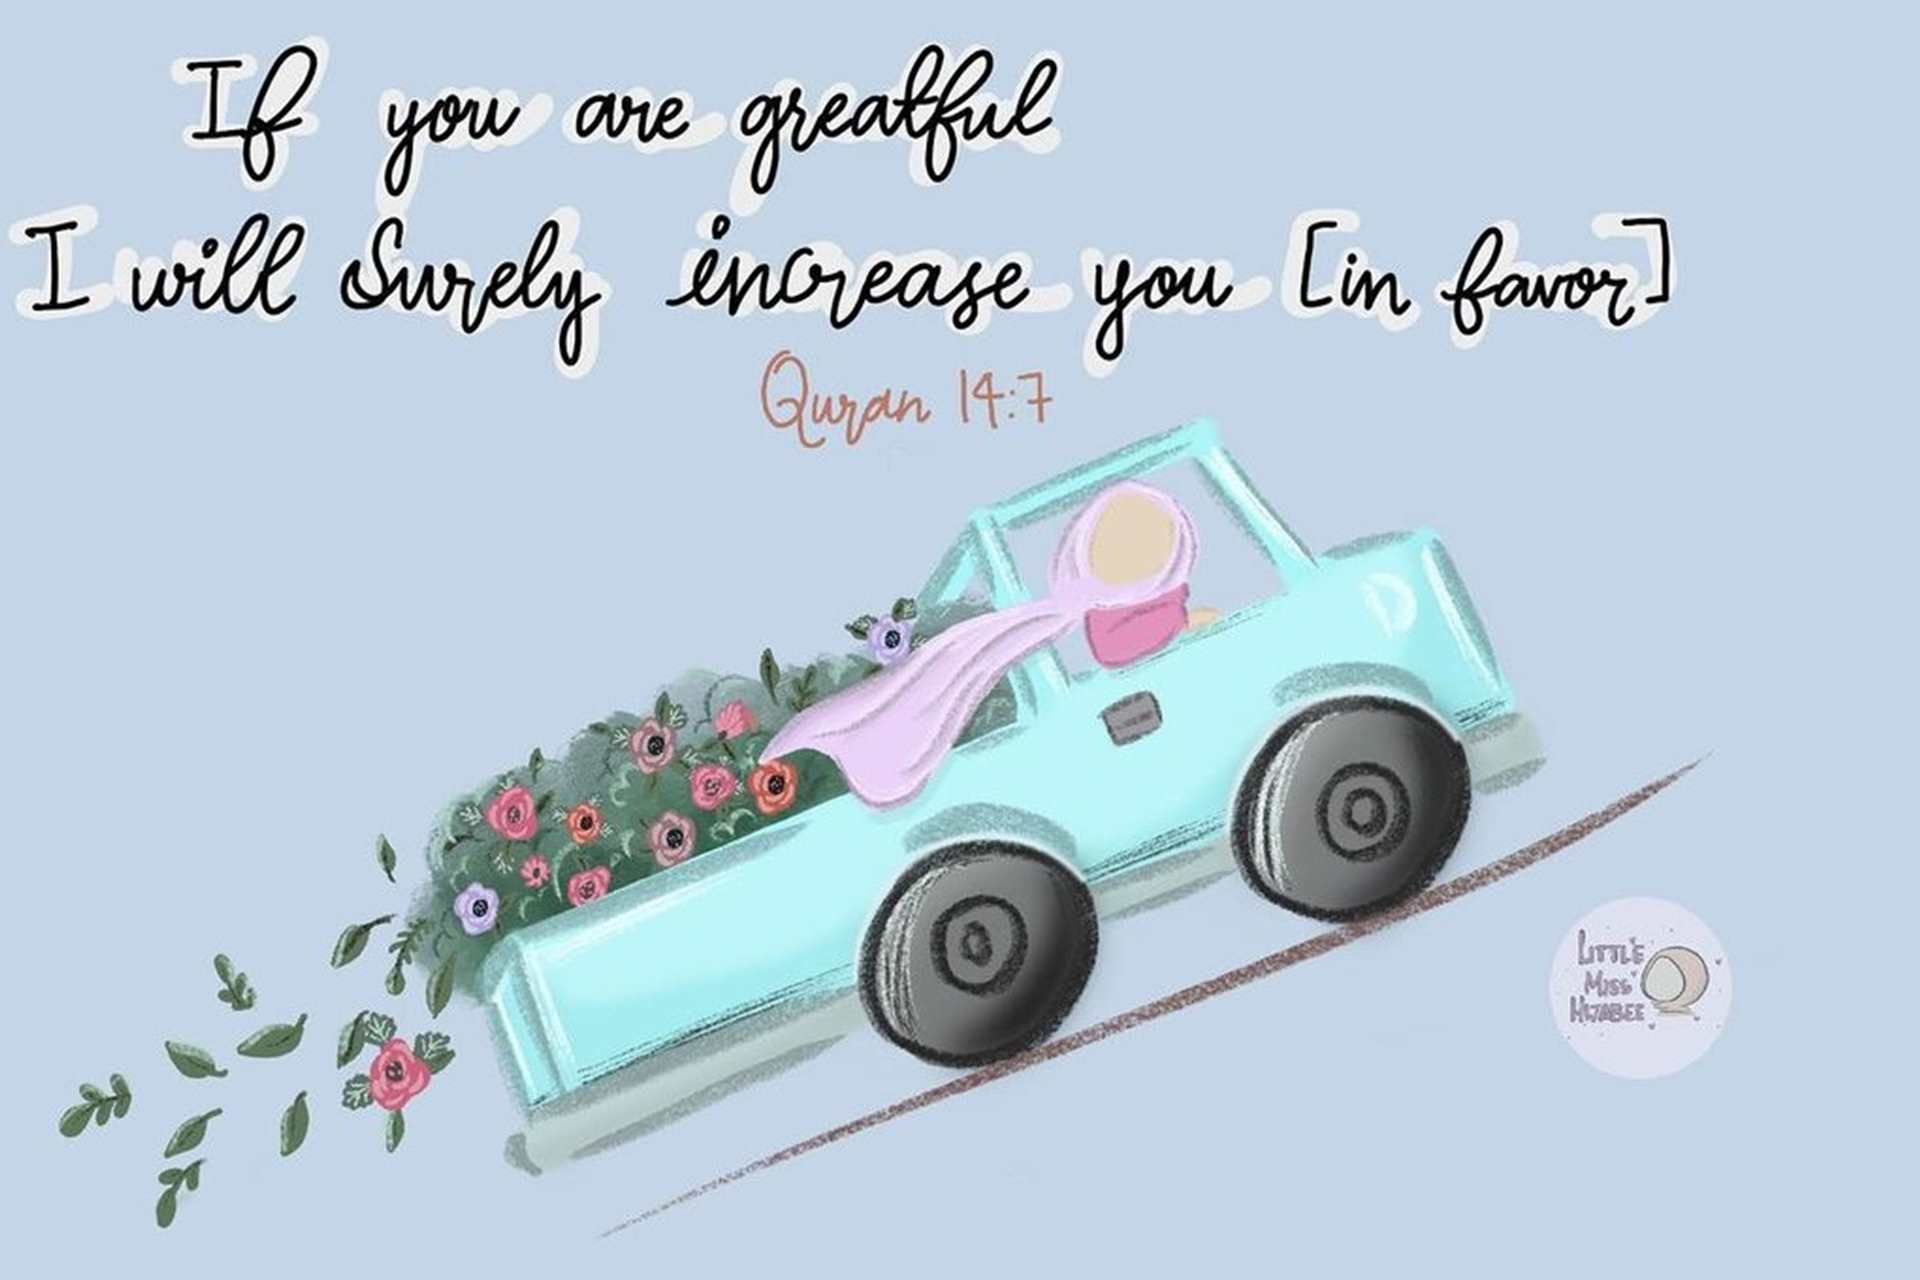 Illustration (by @littlemisshijabee on Instagram) of a female wearing a headscarf driving uphill in a bright blue car with flowers in the back of her truck. There is text that reads: If you are grateful, I will surely increase you [in favour] - Qur'an 14:7.